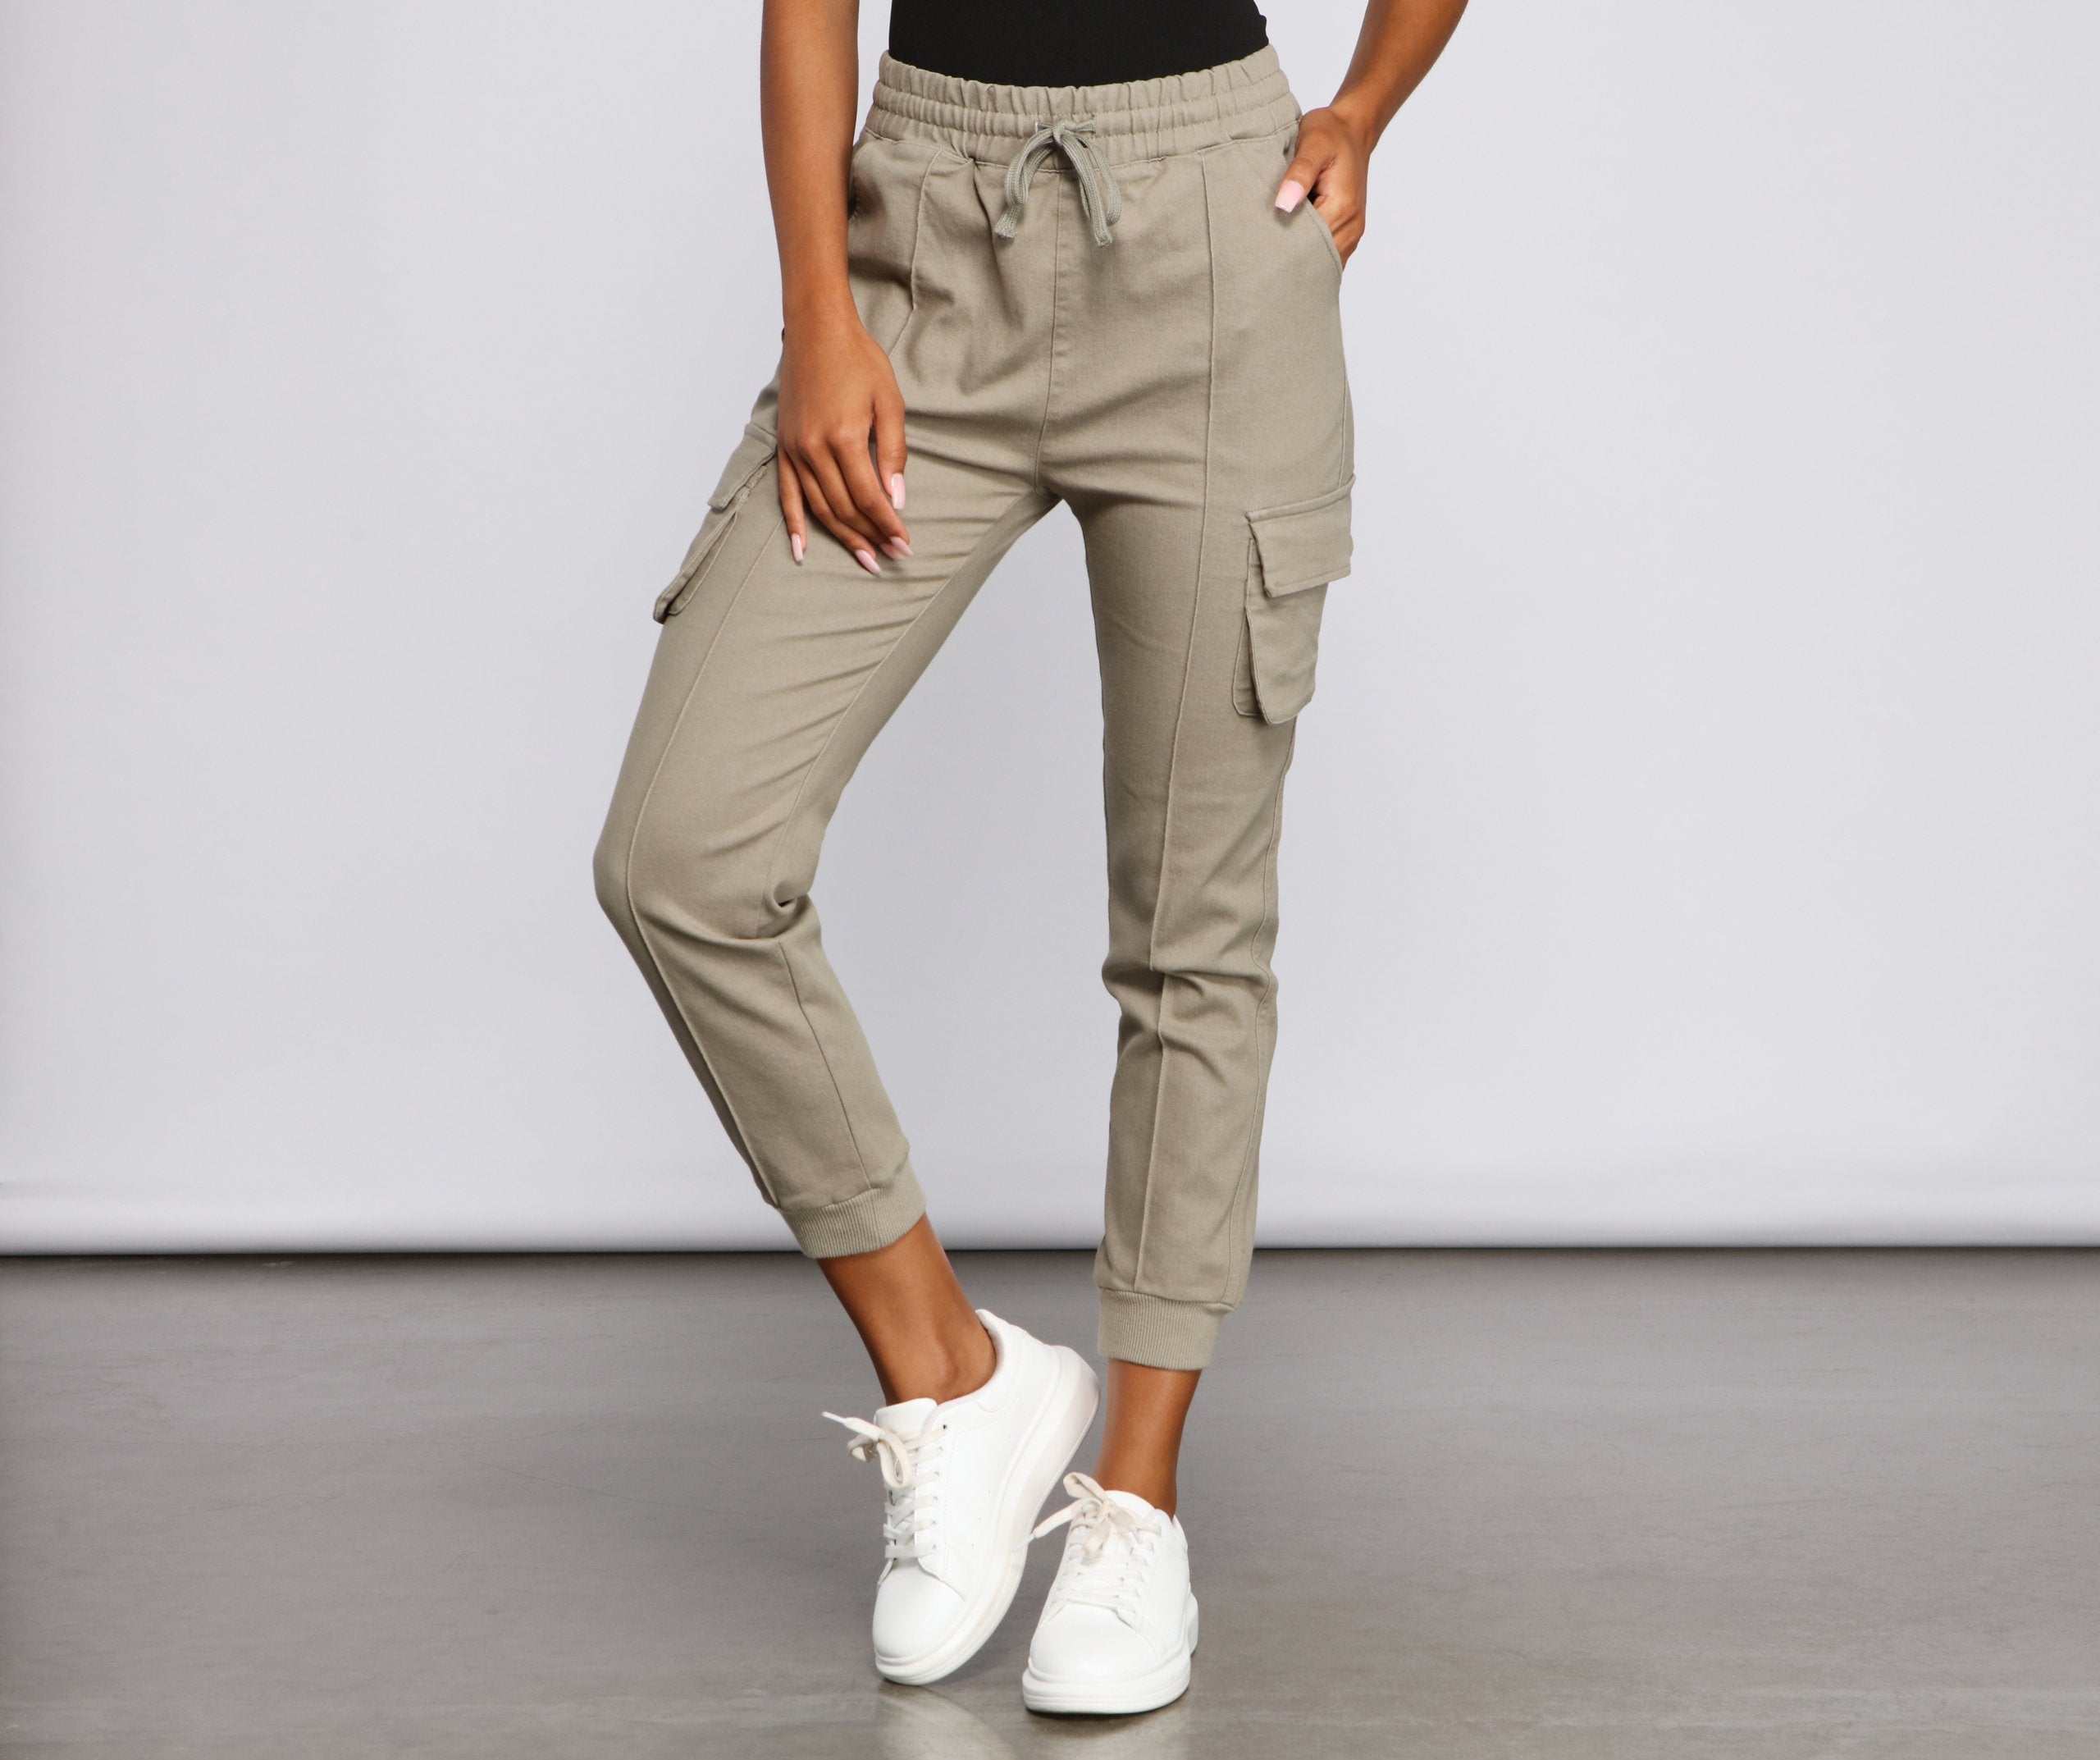 Keeping Knit Lowkey Cargo Joggers - Lady Occasions